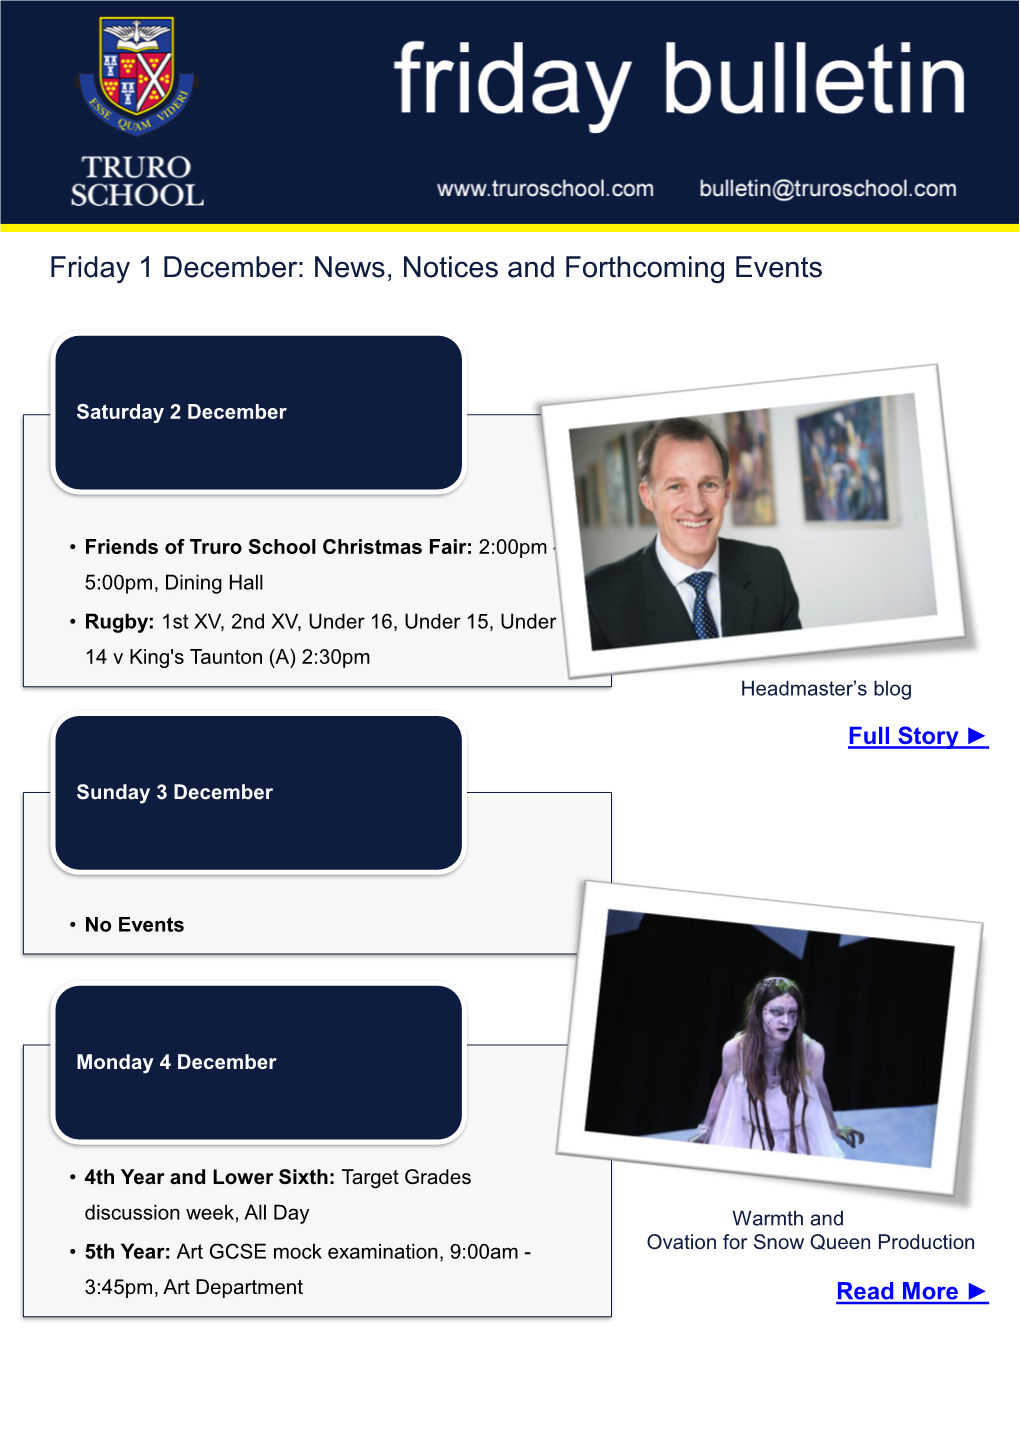 Friday 1 December: News, Notices and Forthcoming Events